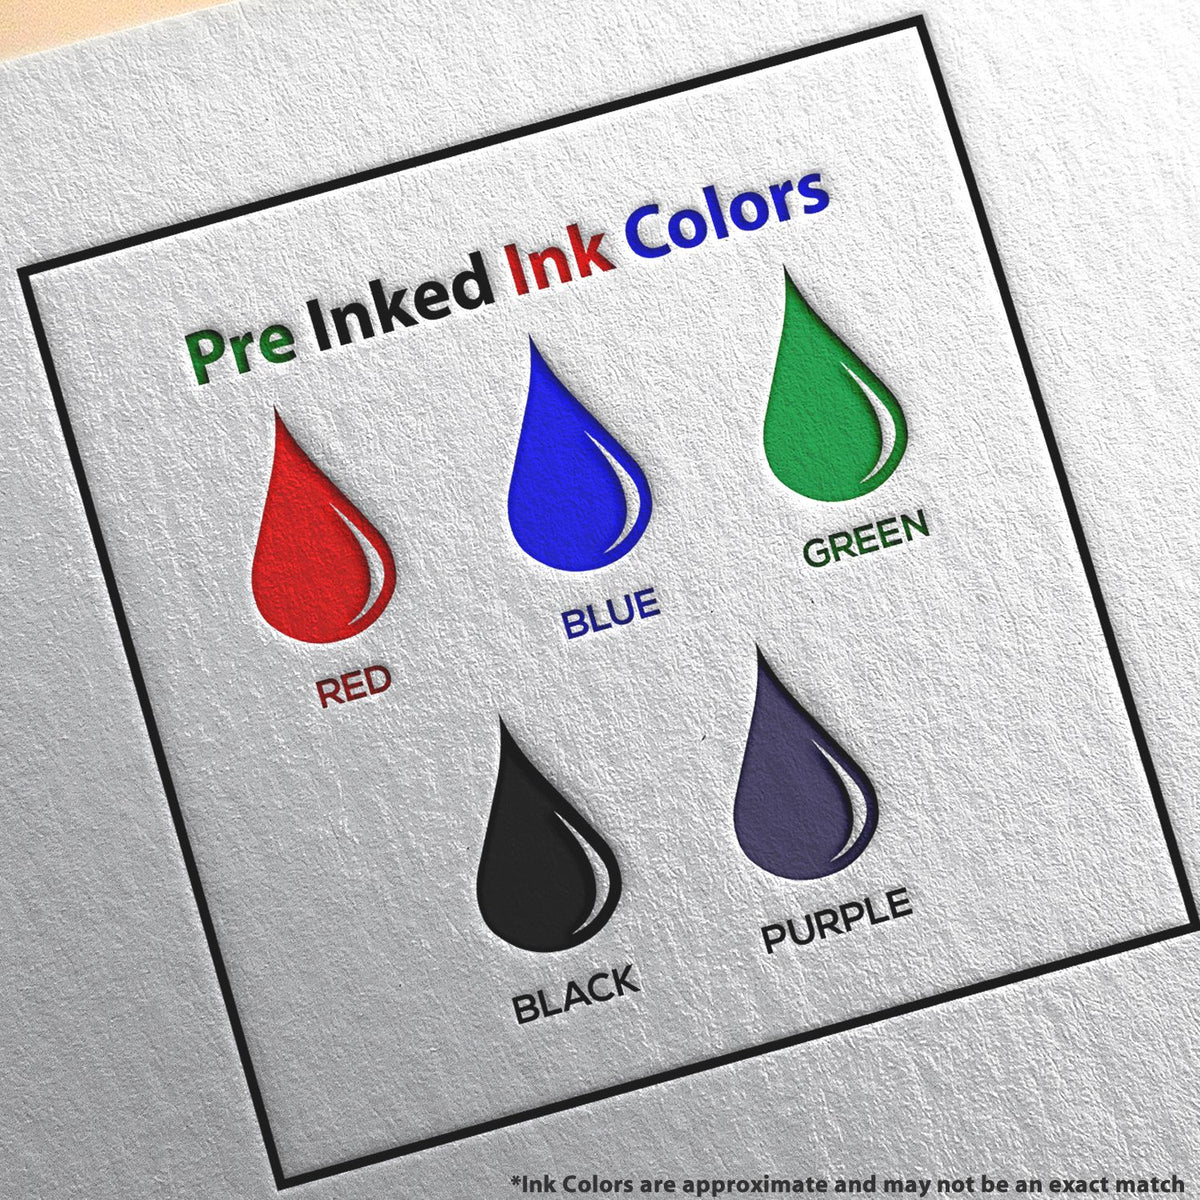 A picture showing the different ink colors or hues available for the Super Slim Louisiana Notary Public Stamp product.